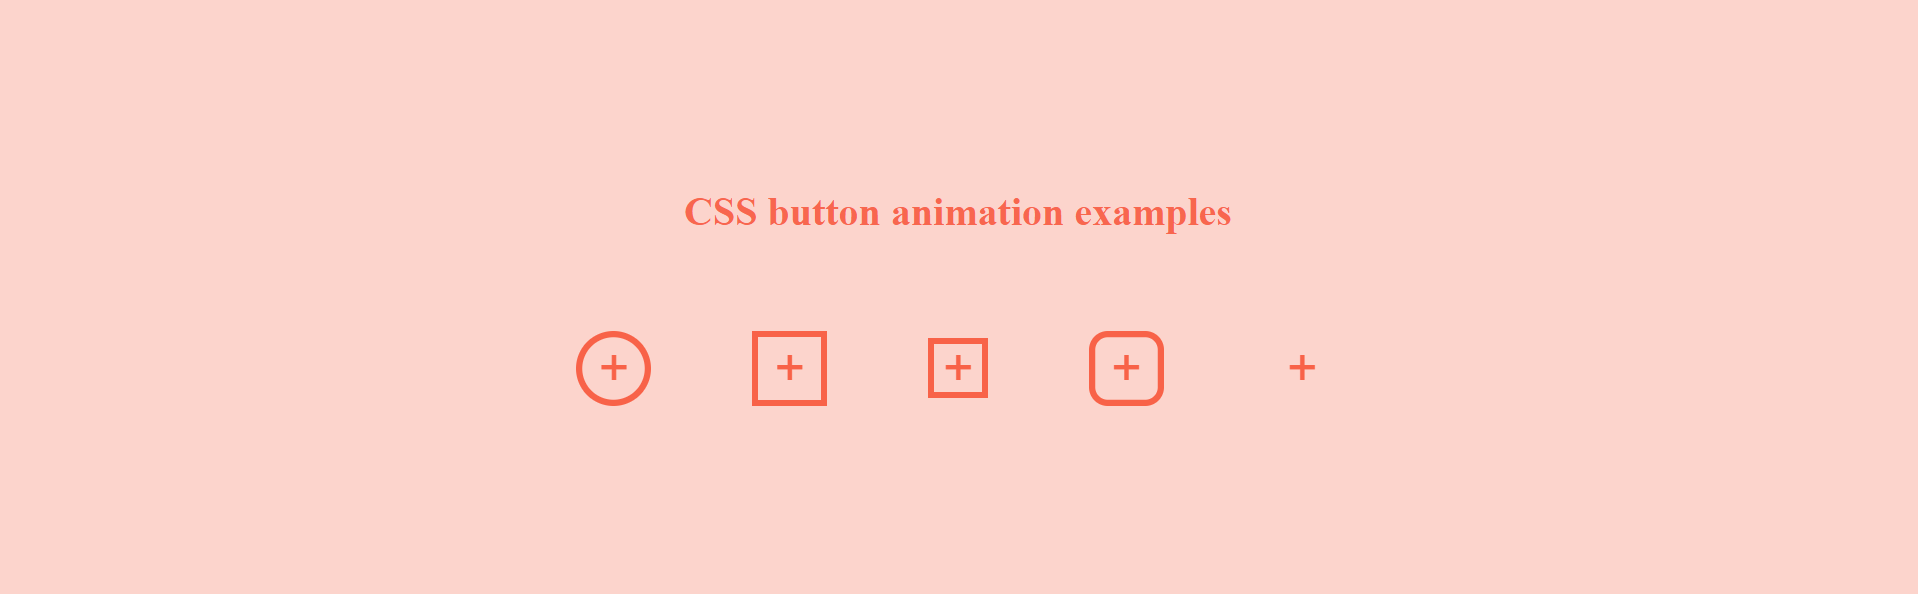 CSS Button Animation Examples